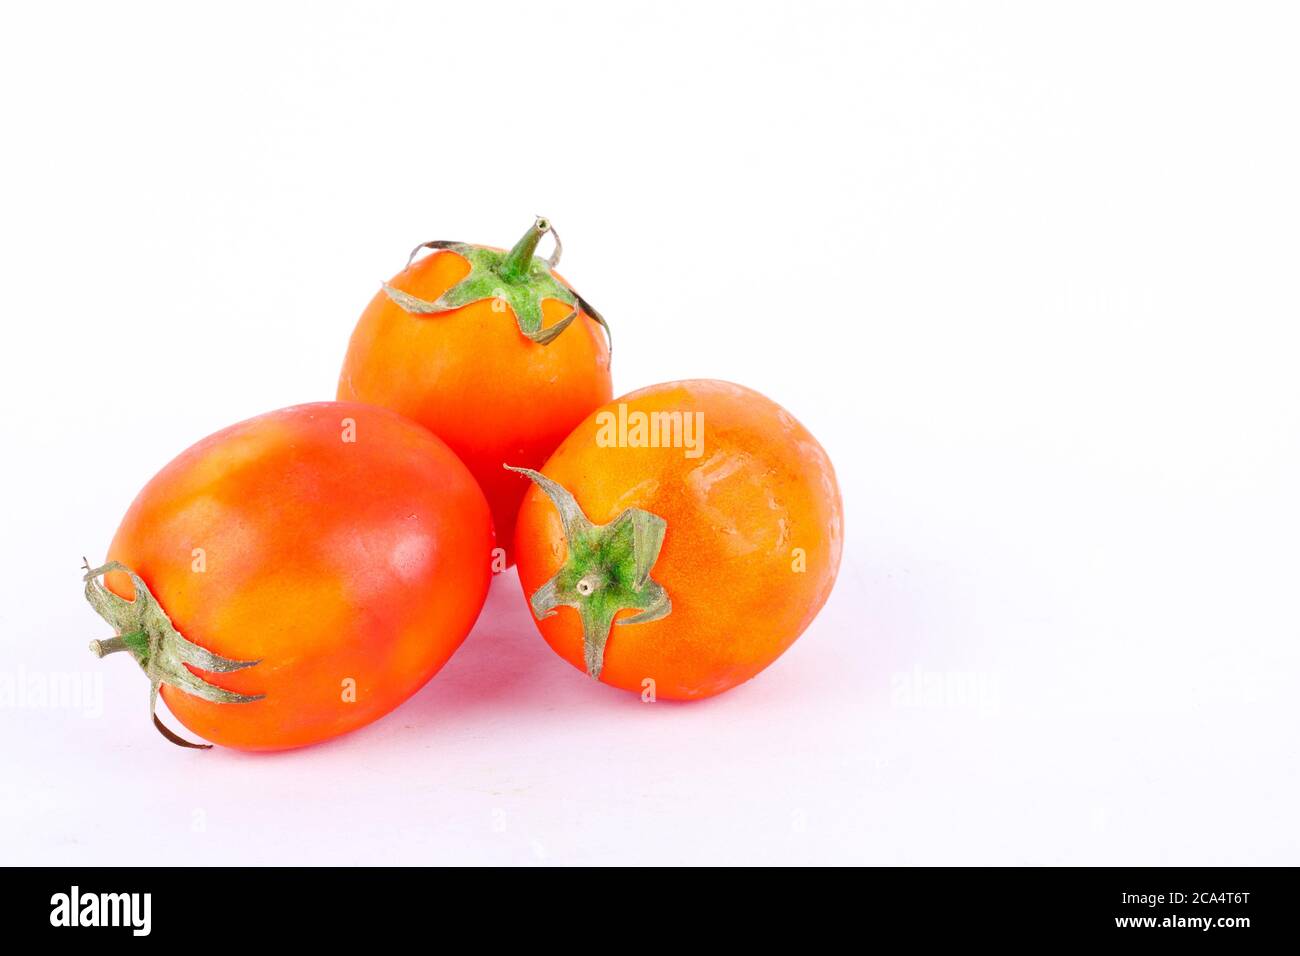 Red tomato is a vegetable that is a major component in making tomato sauce on the white background isolated Stock Photo